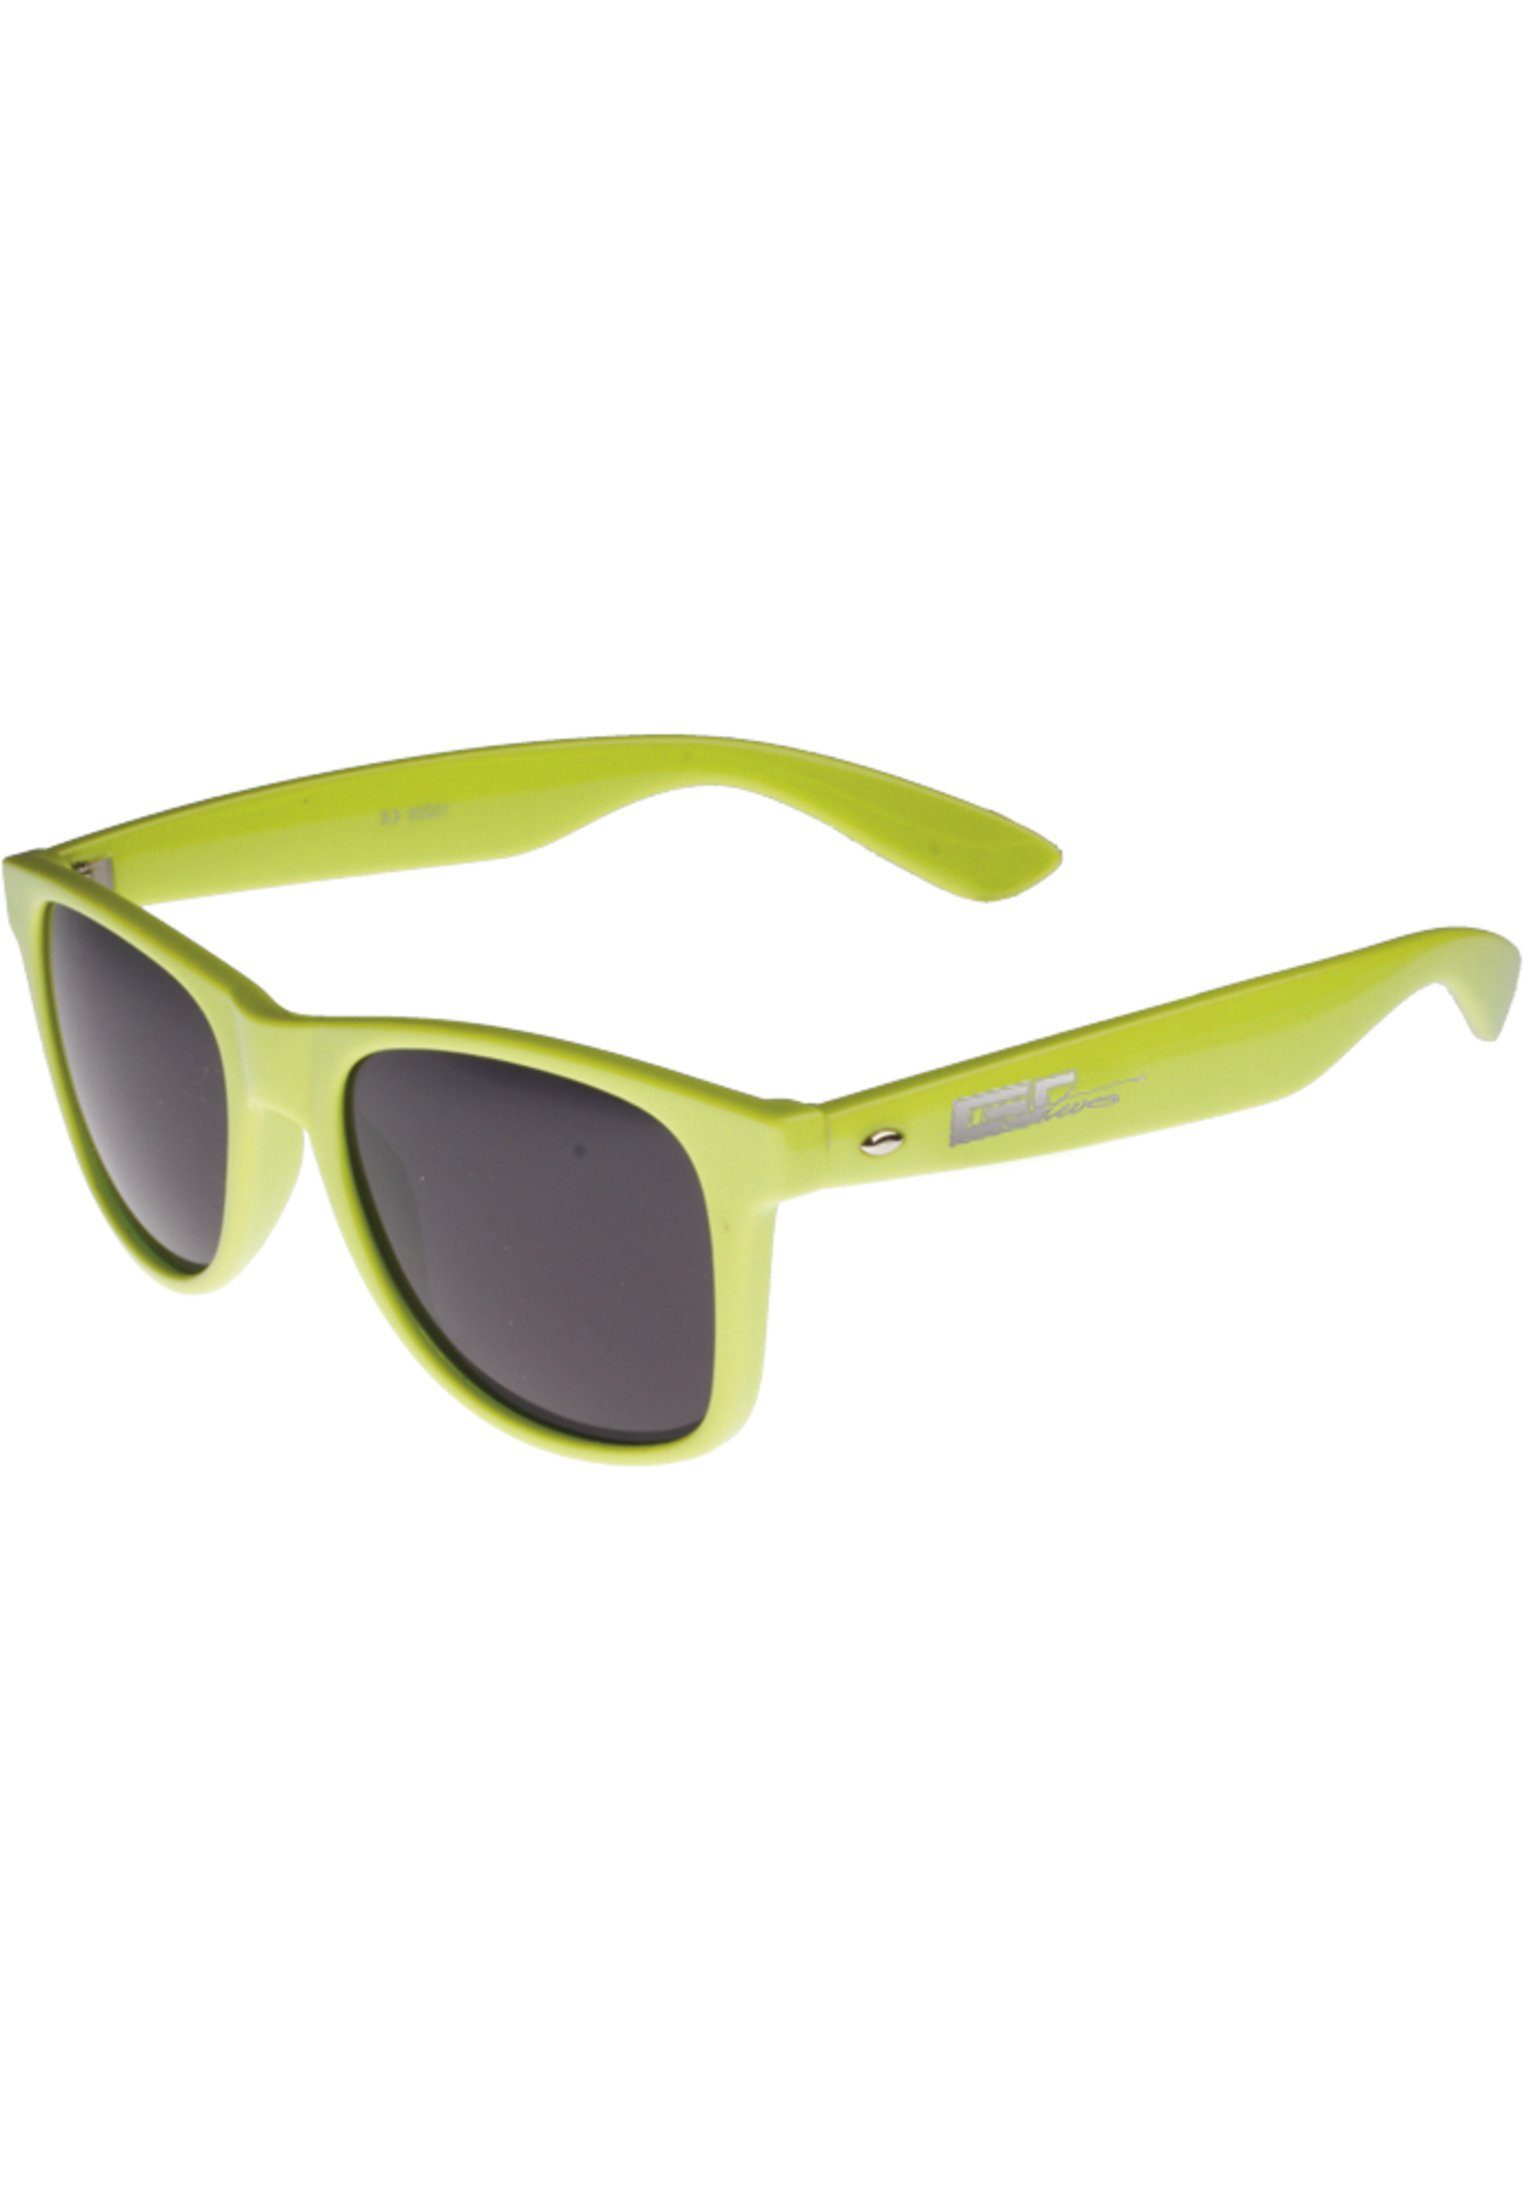 MSTRDS Sonnenbrille neongreen Shades Accessoires GStwo Groove